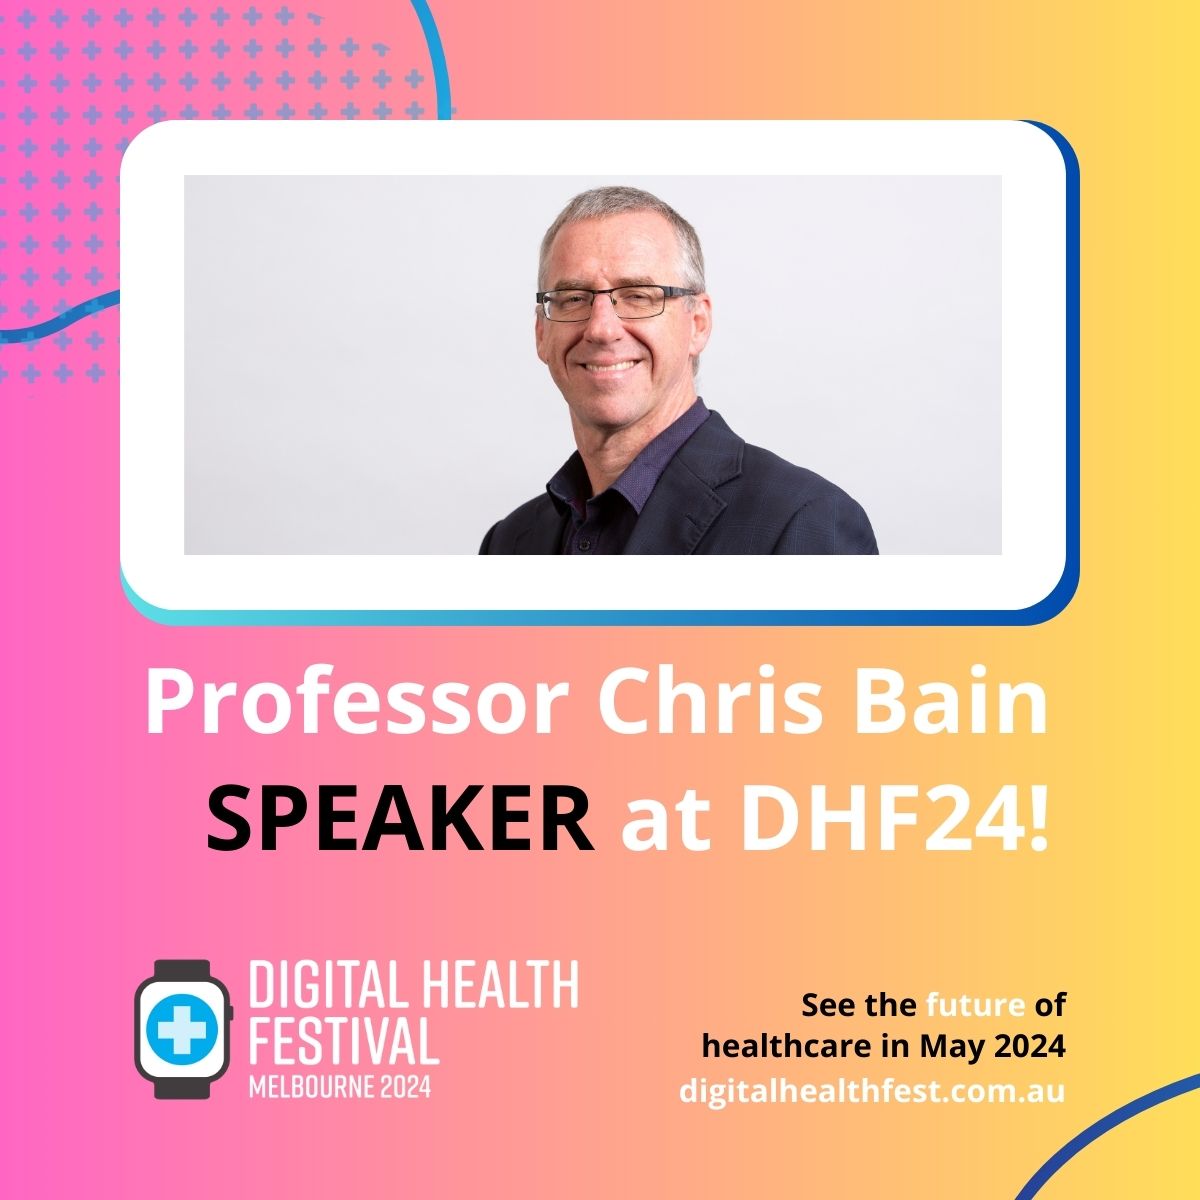 We're excited to have our #DigitalHealth Lead Prof Chris Bain lined up as a speaker for #DHF24 - Australia’s most important health technology event!

Running from 7-8 May, discover what's in store and get your tickets! digitalhealthfest.com.au
@monashdigital